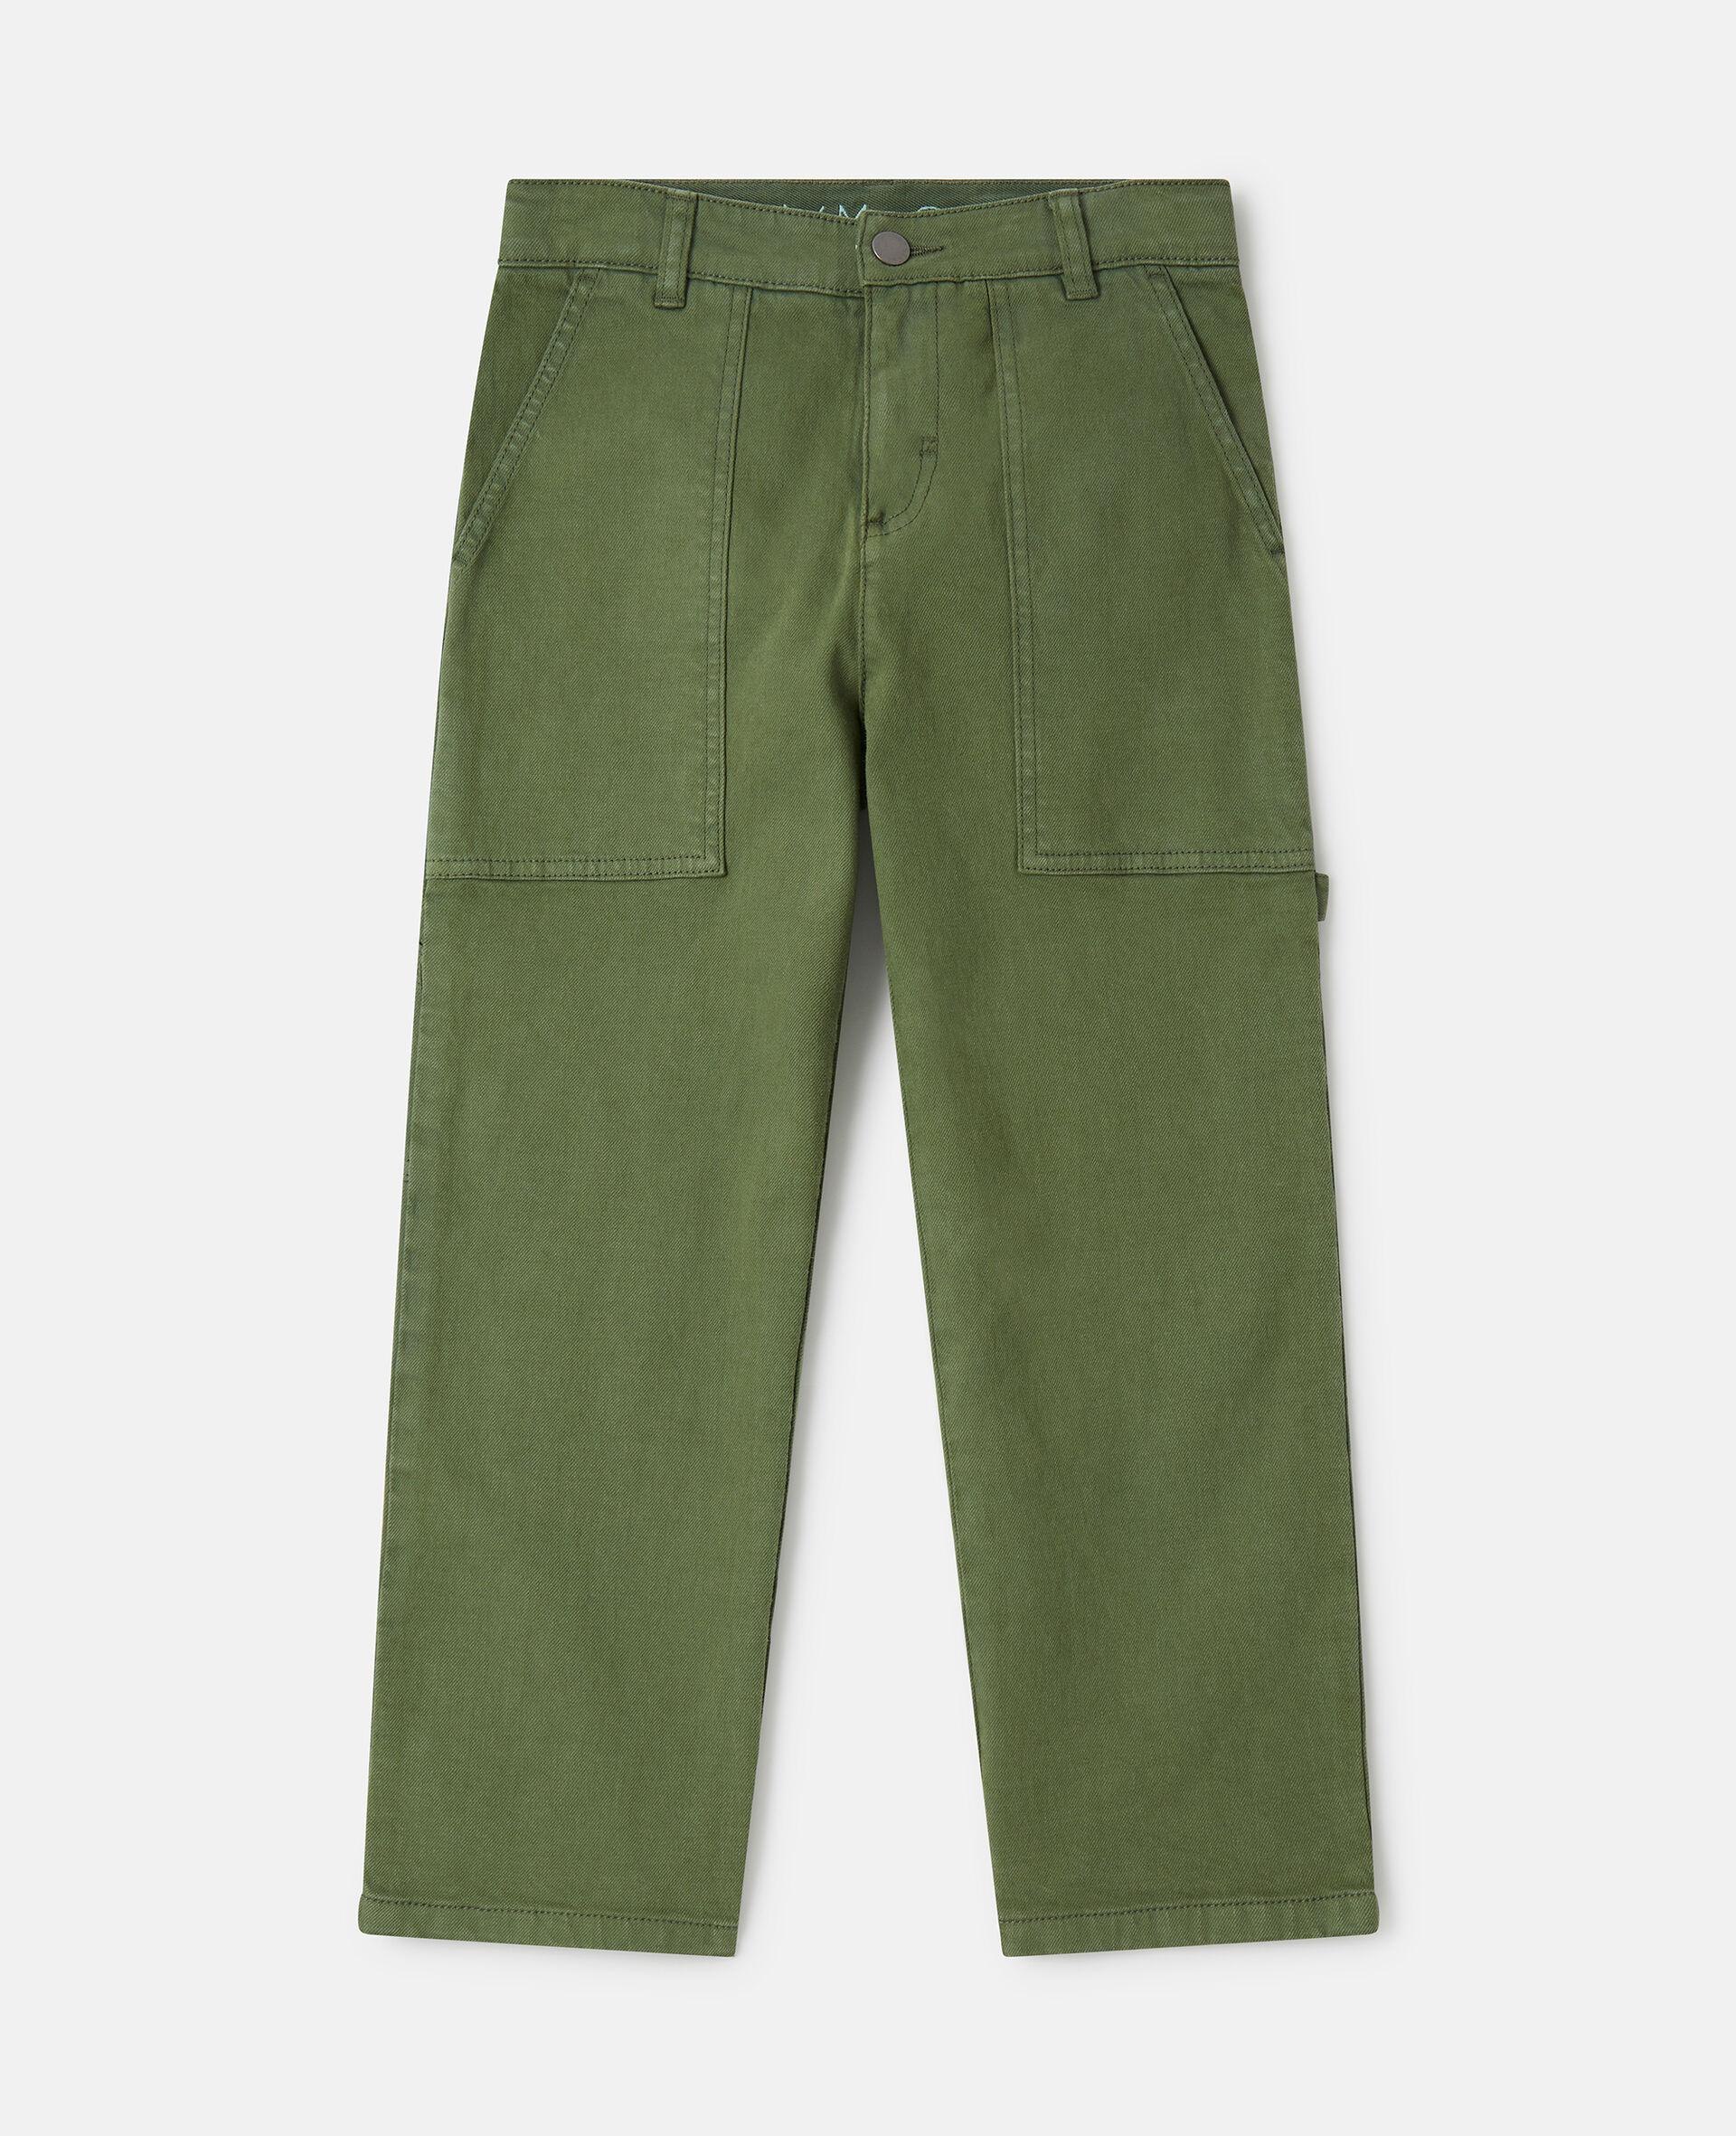 Patch Pocket Trousers-Green-large image number 0